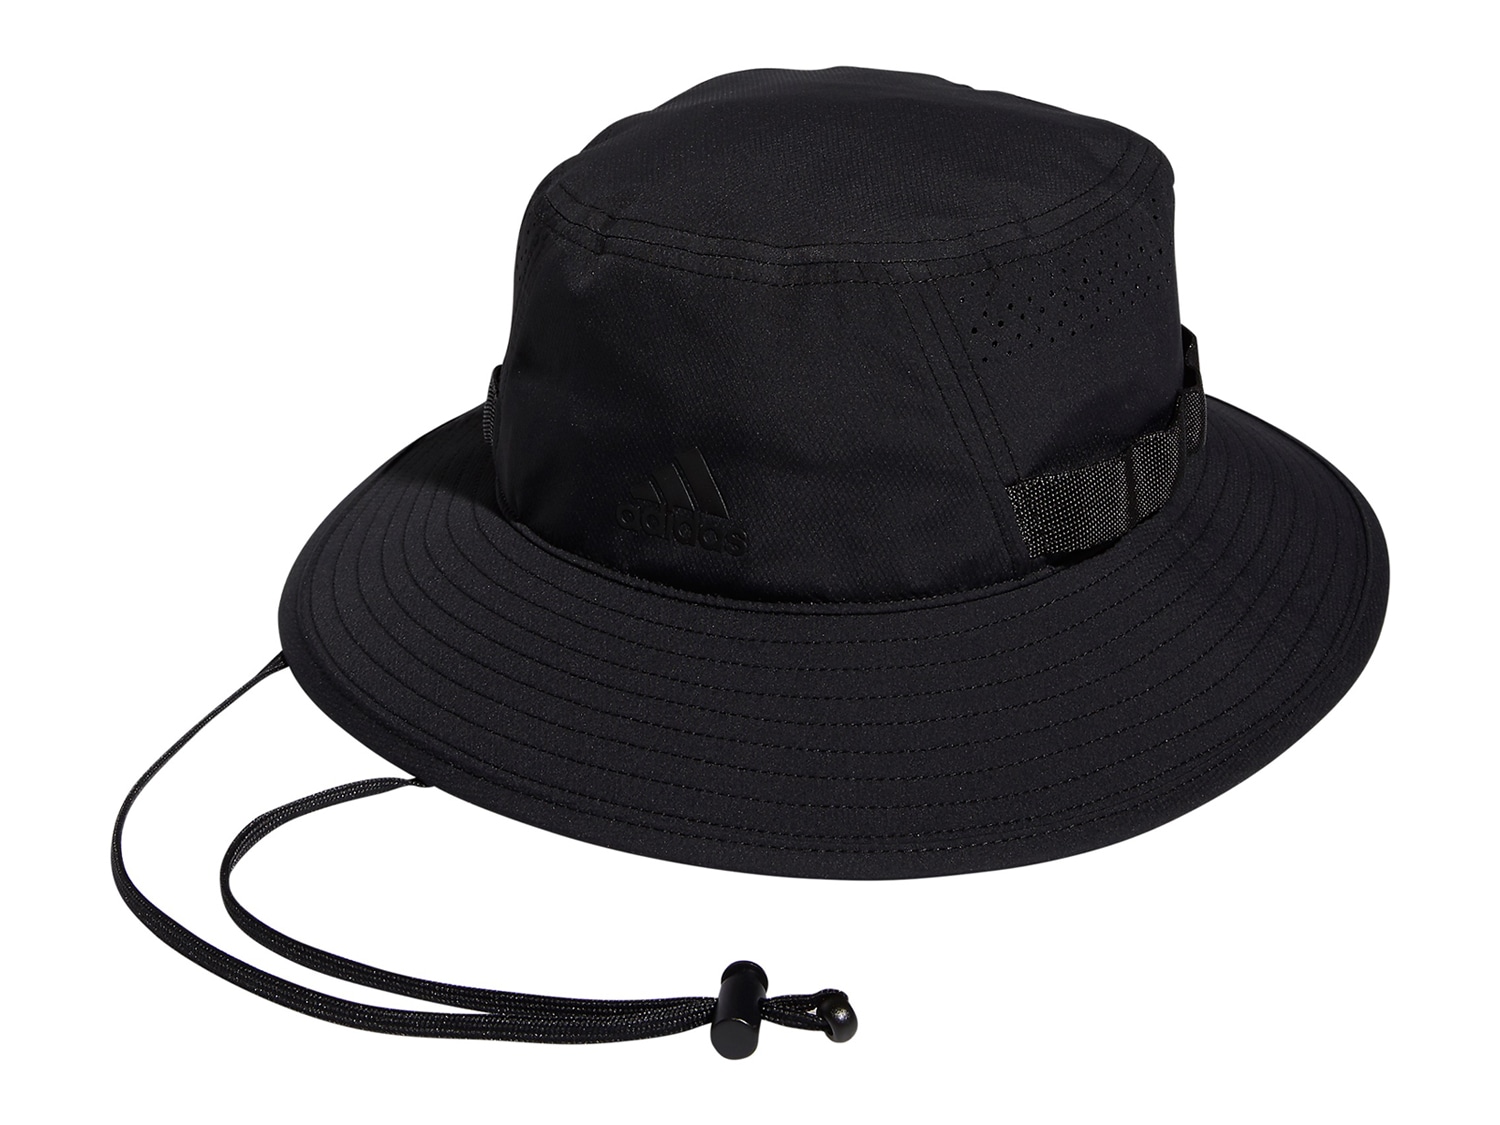 Agua con gas chocolate cosecha adidas Victory 4 Men's Bucket Hat - Free Shipping | DSW